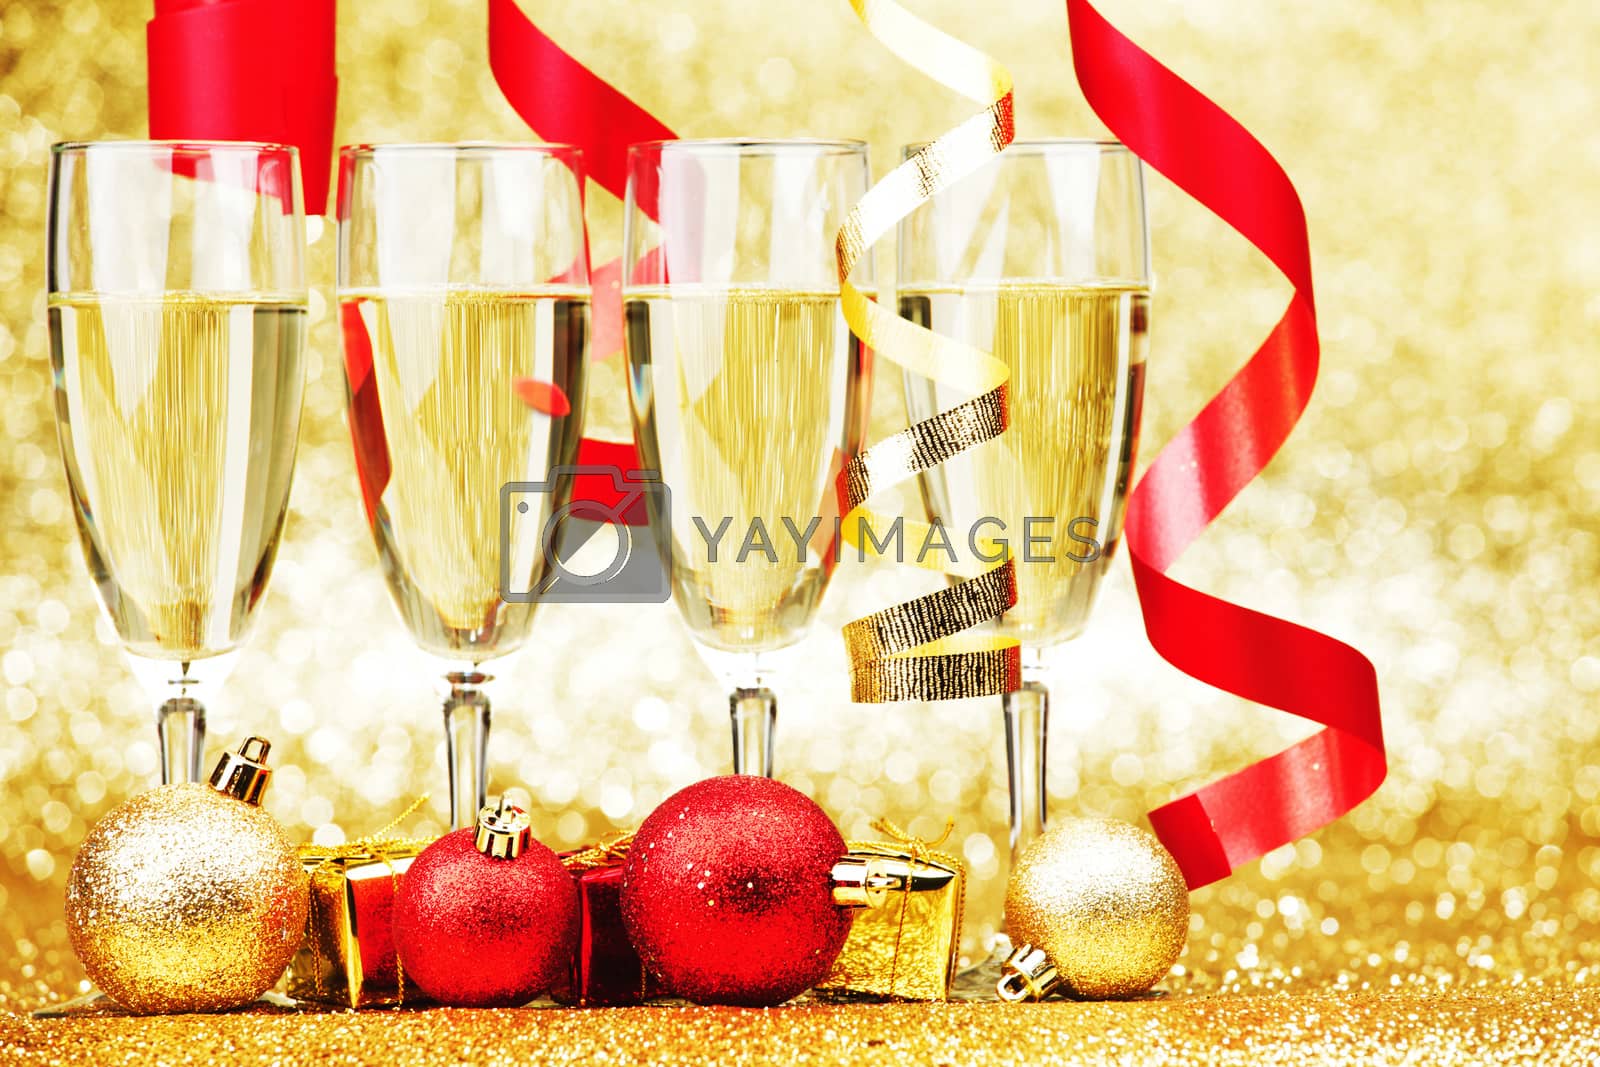 Royalty free image of Champagne and ribbons by Yellowj